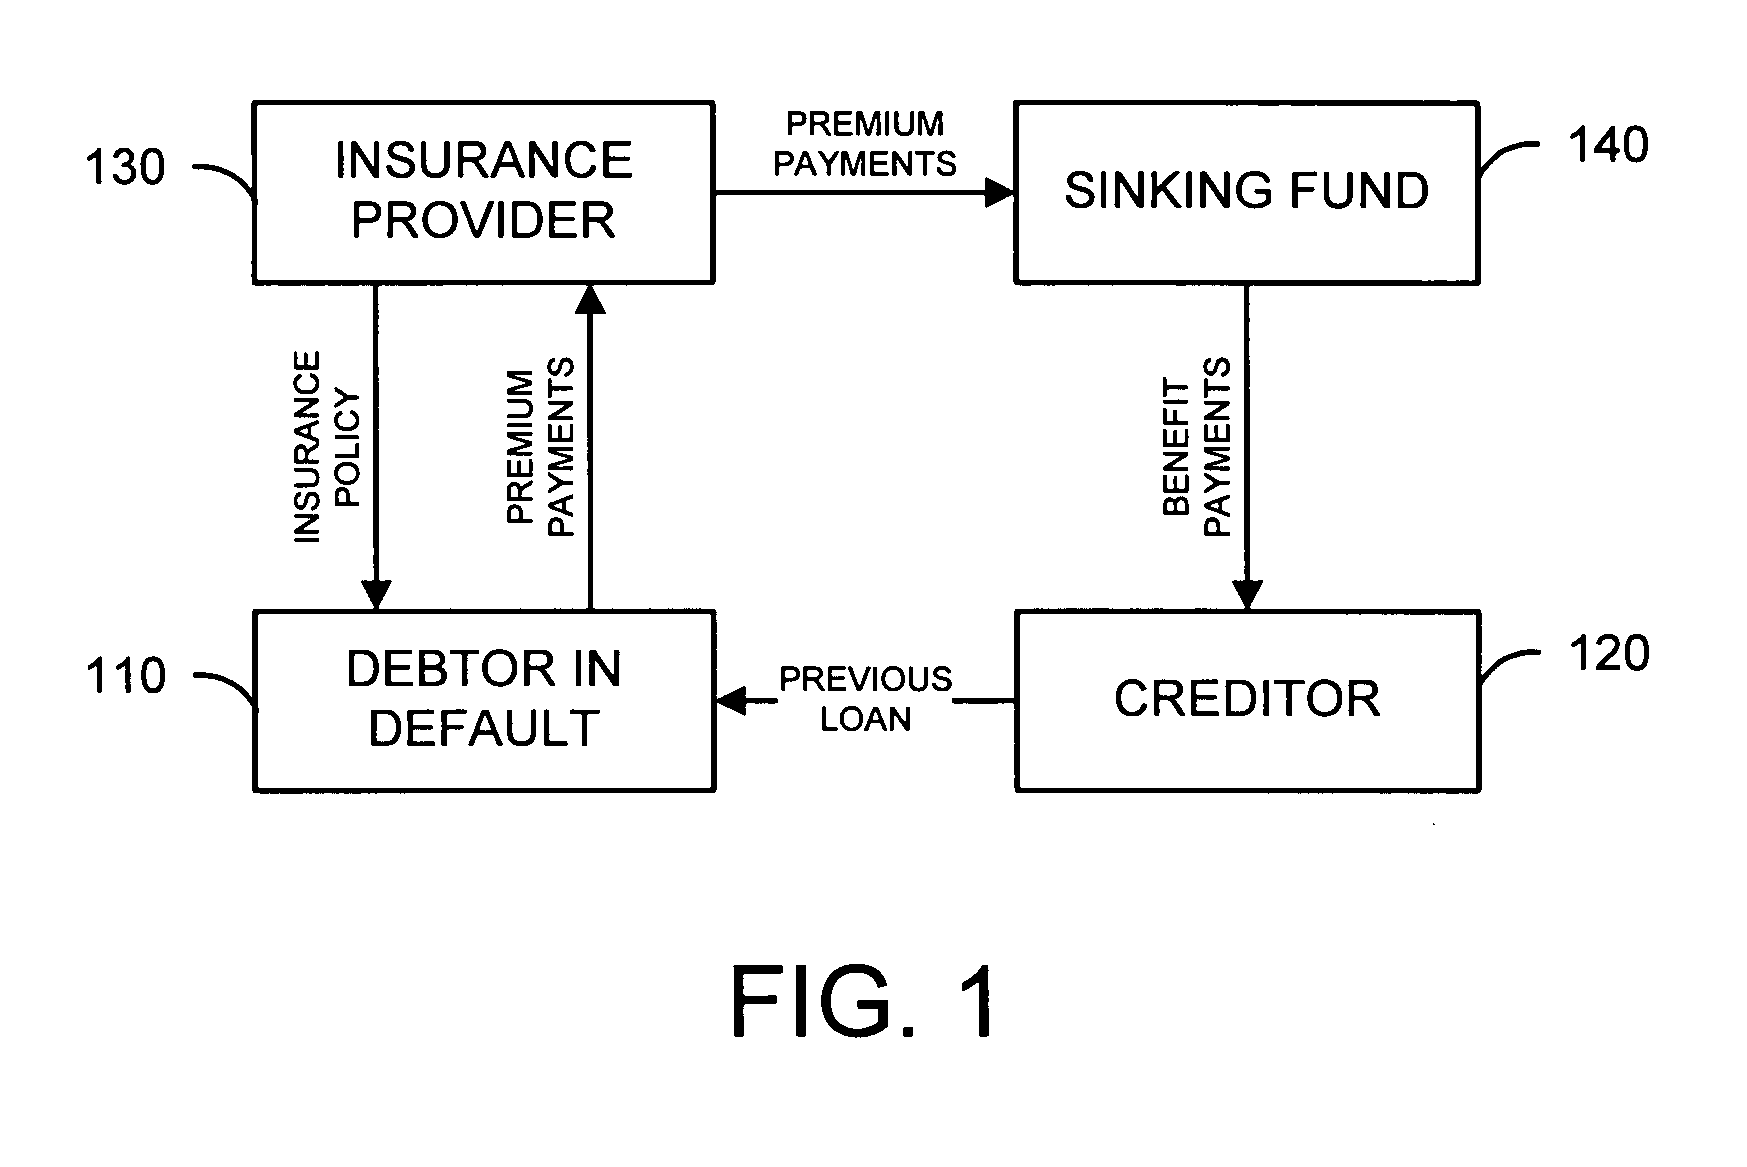 Debt collection system